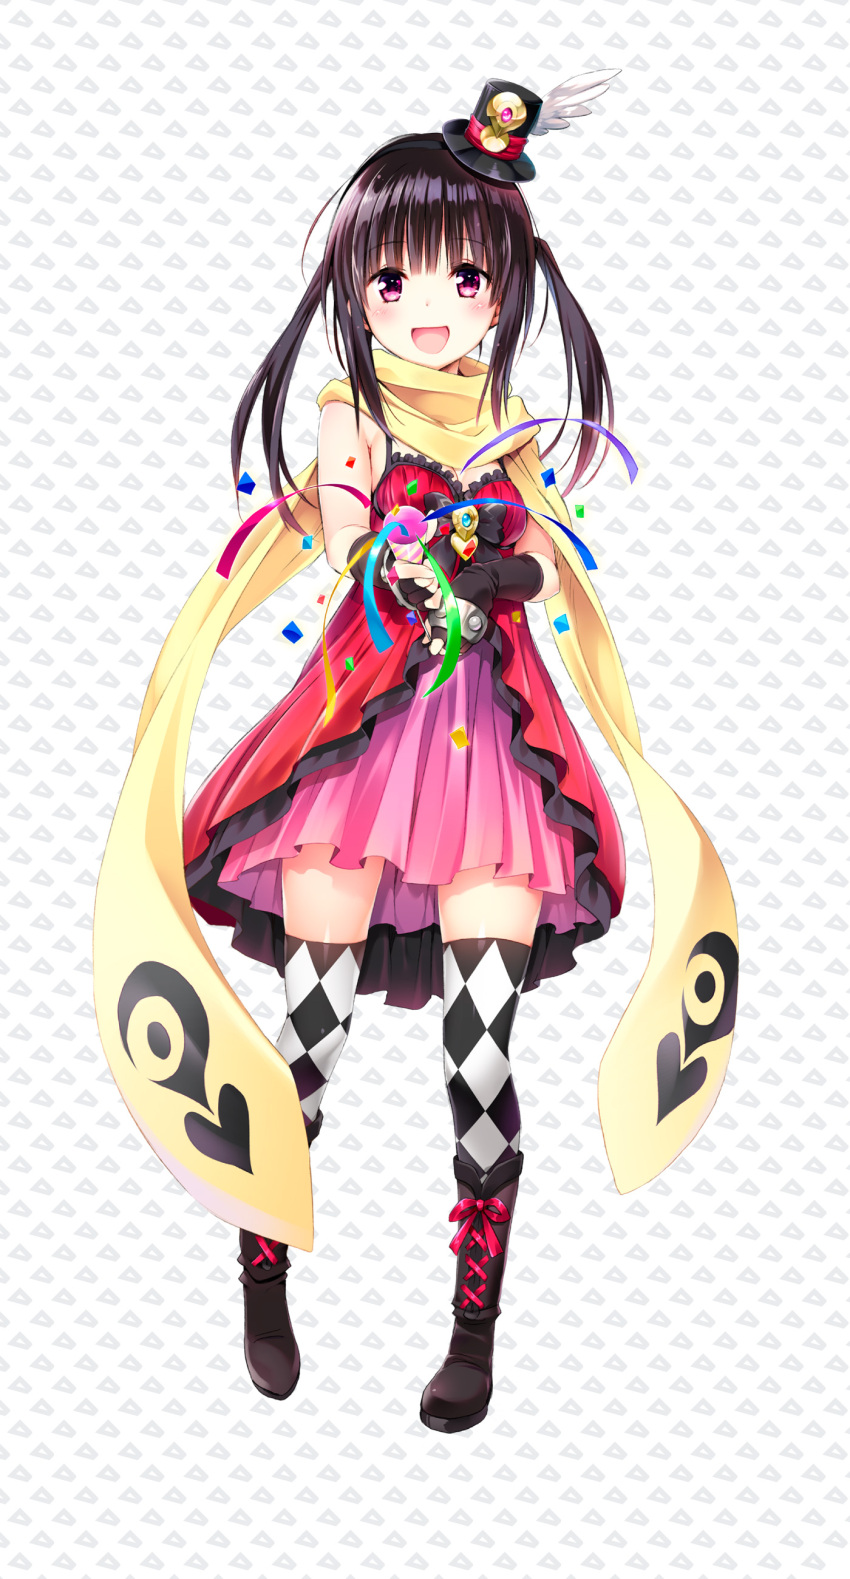 1girl :d absurdres anniversary black_bow black_hair blush boots bow confetti diamond_legwear dress gem hat hat_feather hatena_illusion highres hoshisato_kana mini_hat mini_top_hat open_mouth party_popper pink_dress red_dress red_eyes smile solo standing streamers thigh-highs top_hat twintails yabuki_kentarou zettai_ryouiki